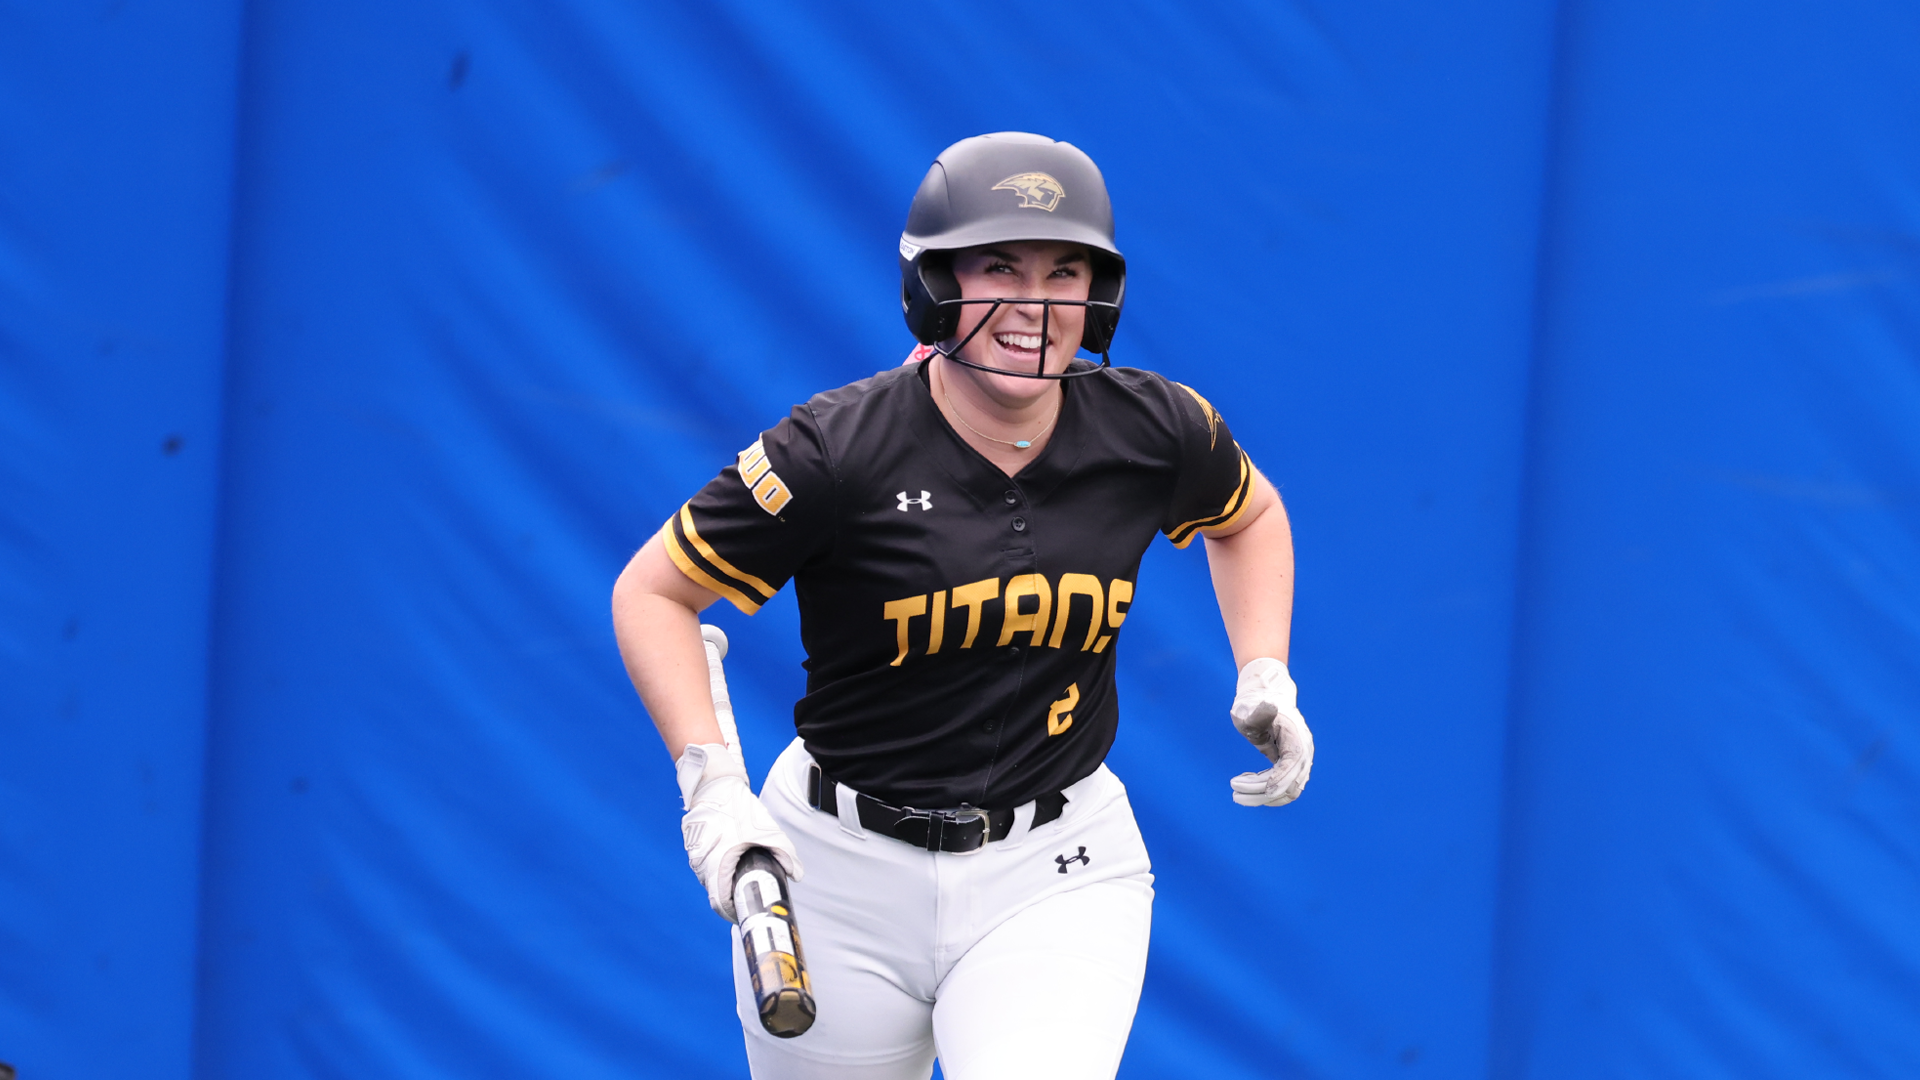 Morgan Rau went 3-5 with 4 RBI in the Titans' wins over the Yellowjackets and Duhawks on Saturday. Photo Credit: Steve Frommell, UW-Oshkosh Sports Information